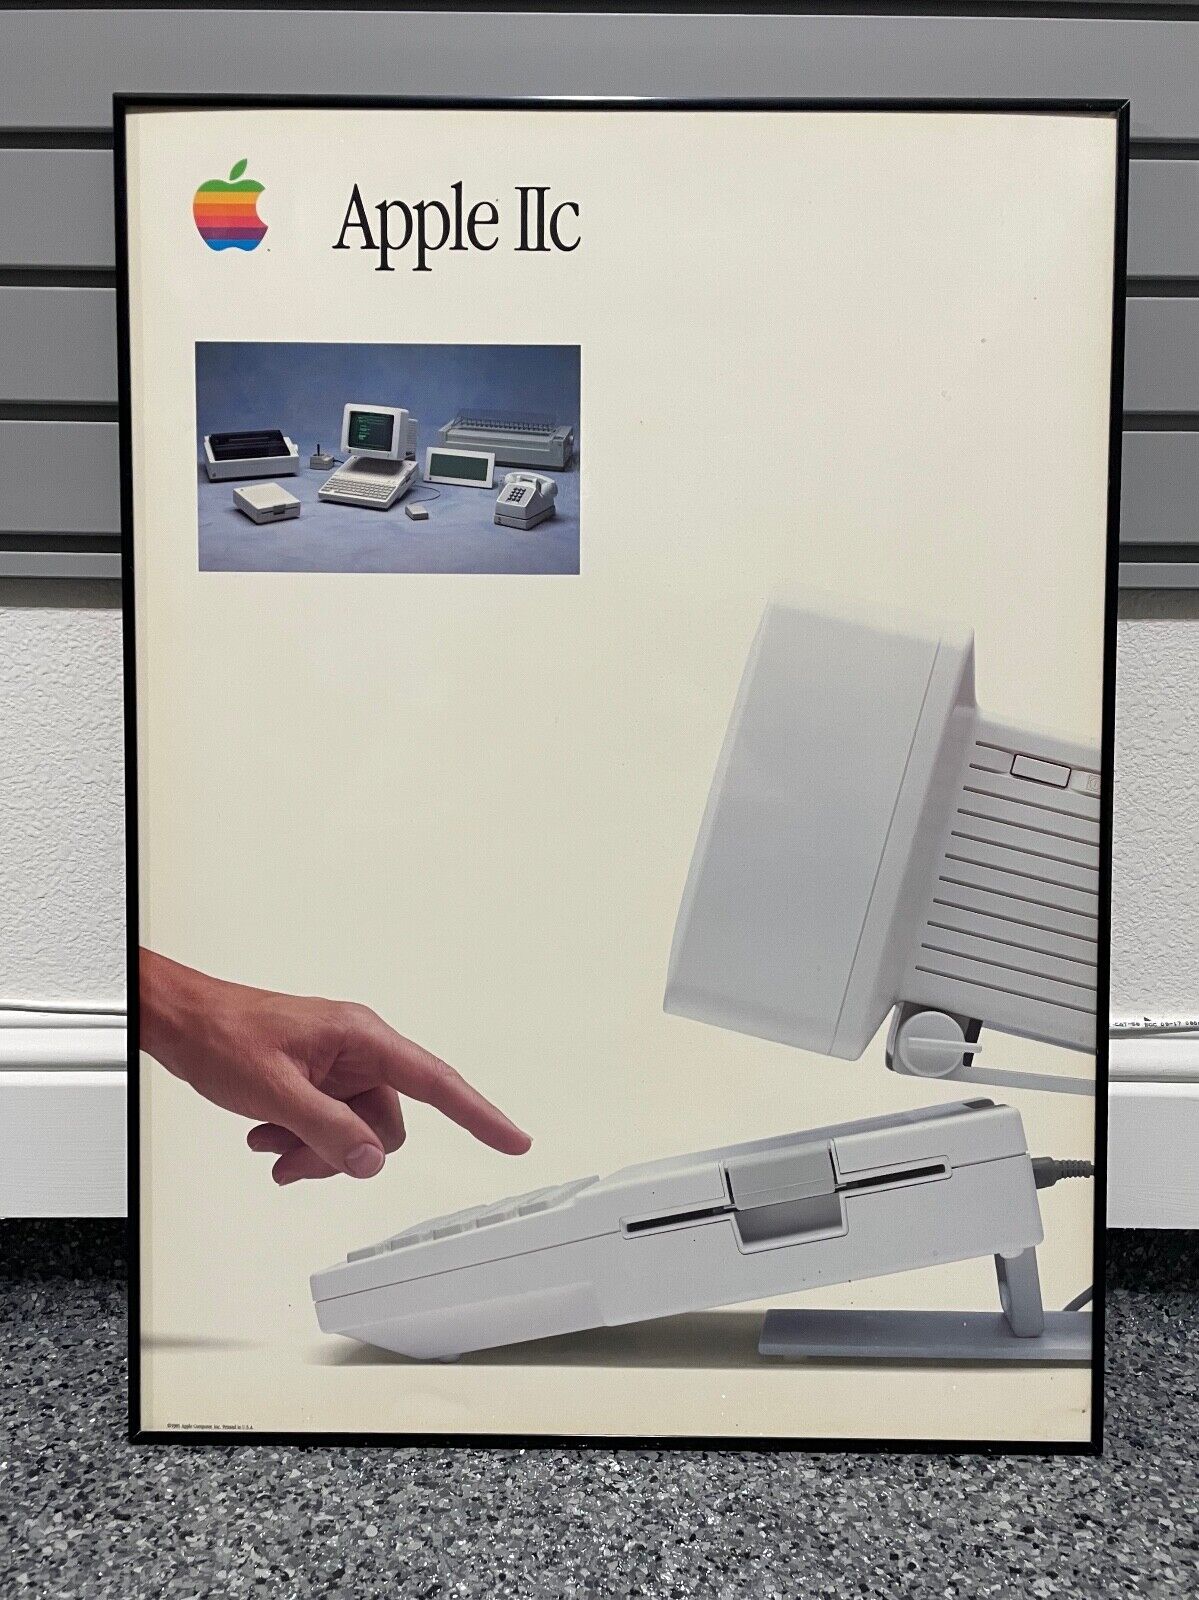 Apple IIc 1985 Computer Framed Poster  1985  Vintage Rare  Approx 30x22 USA Made